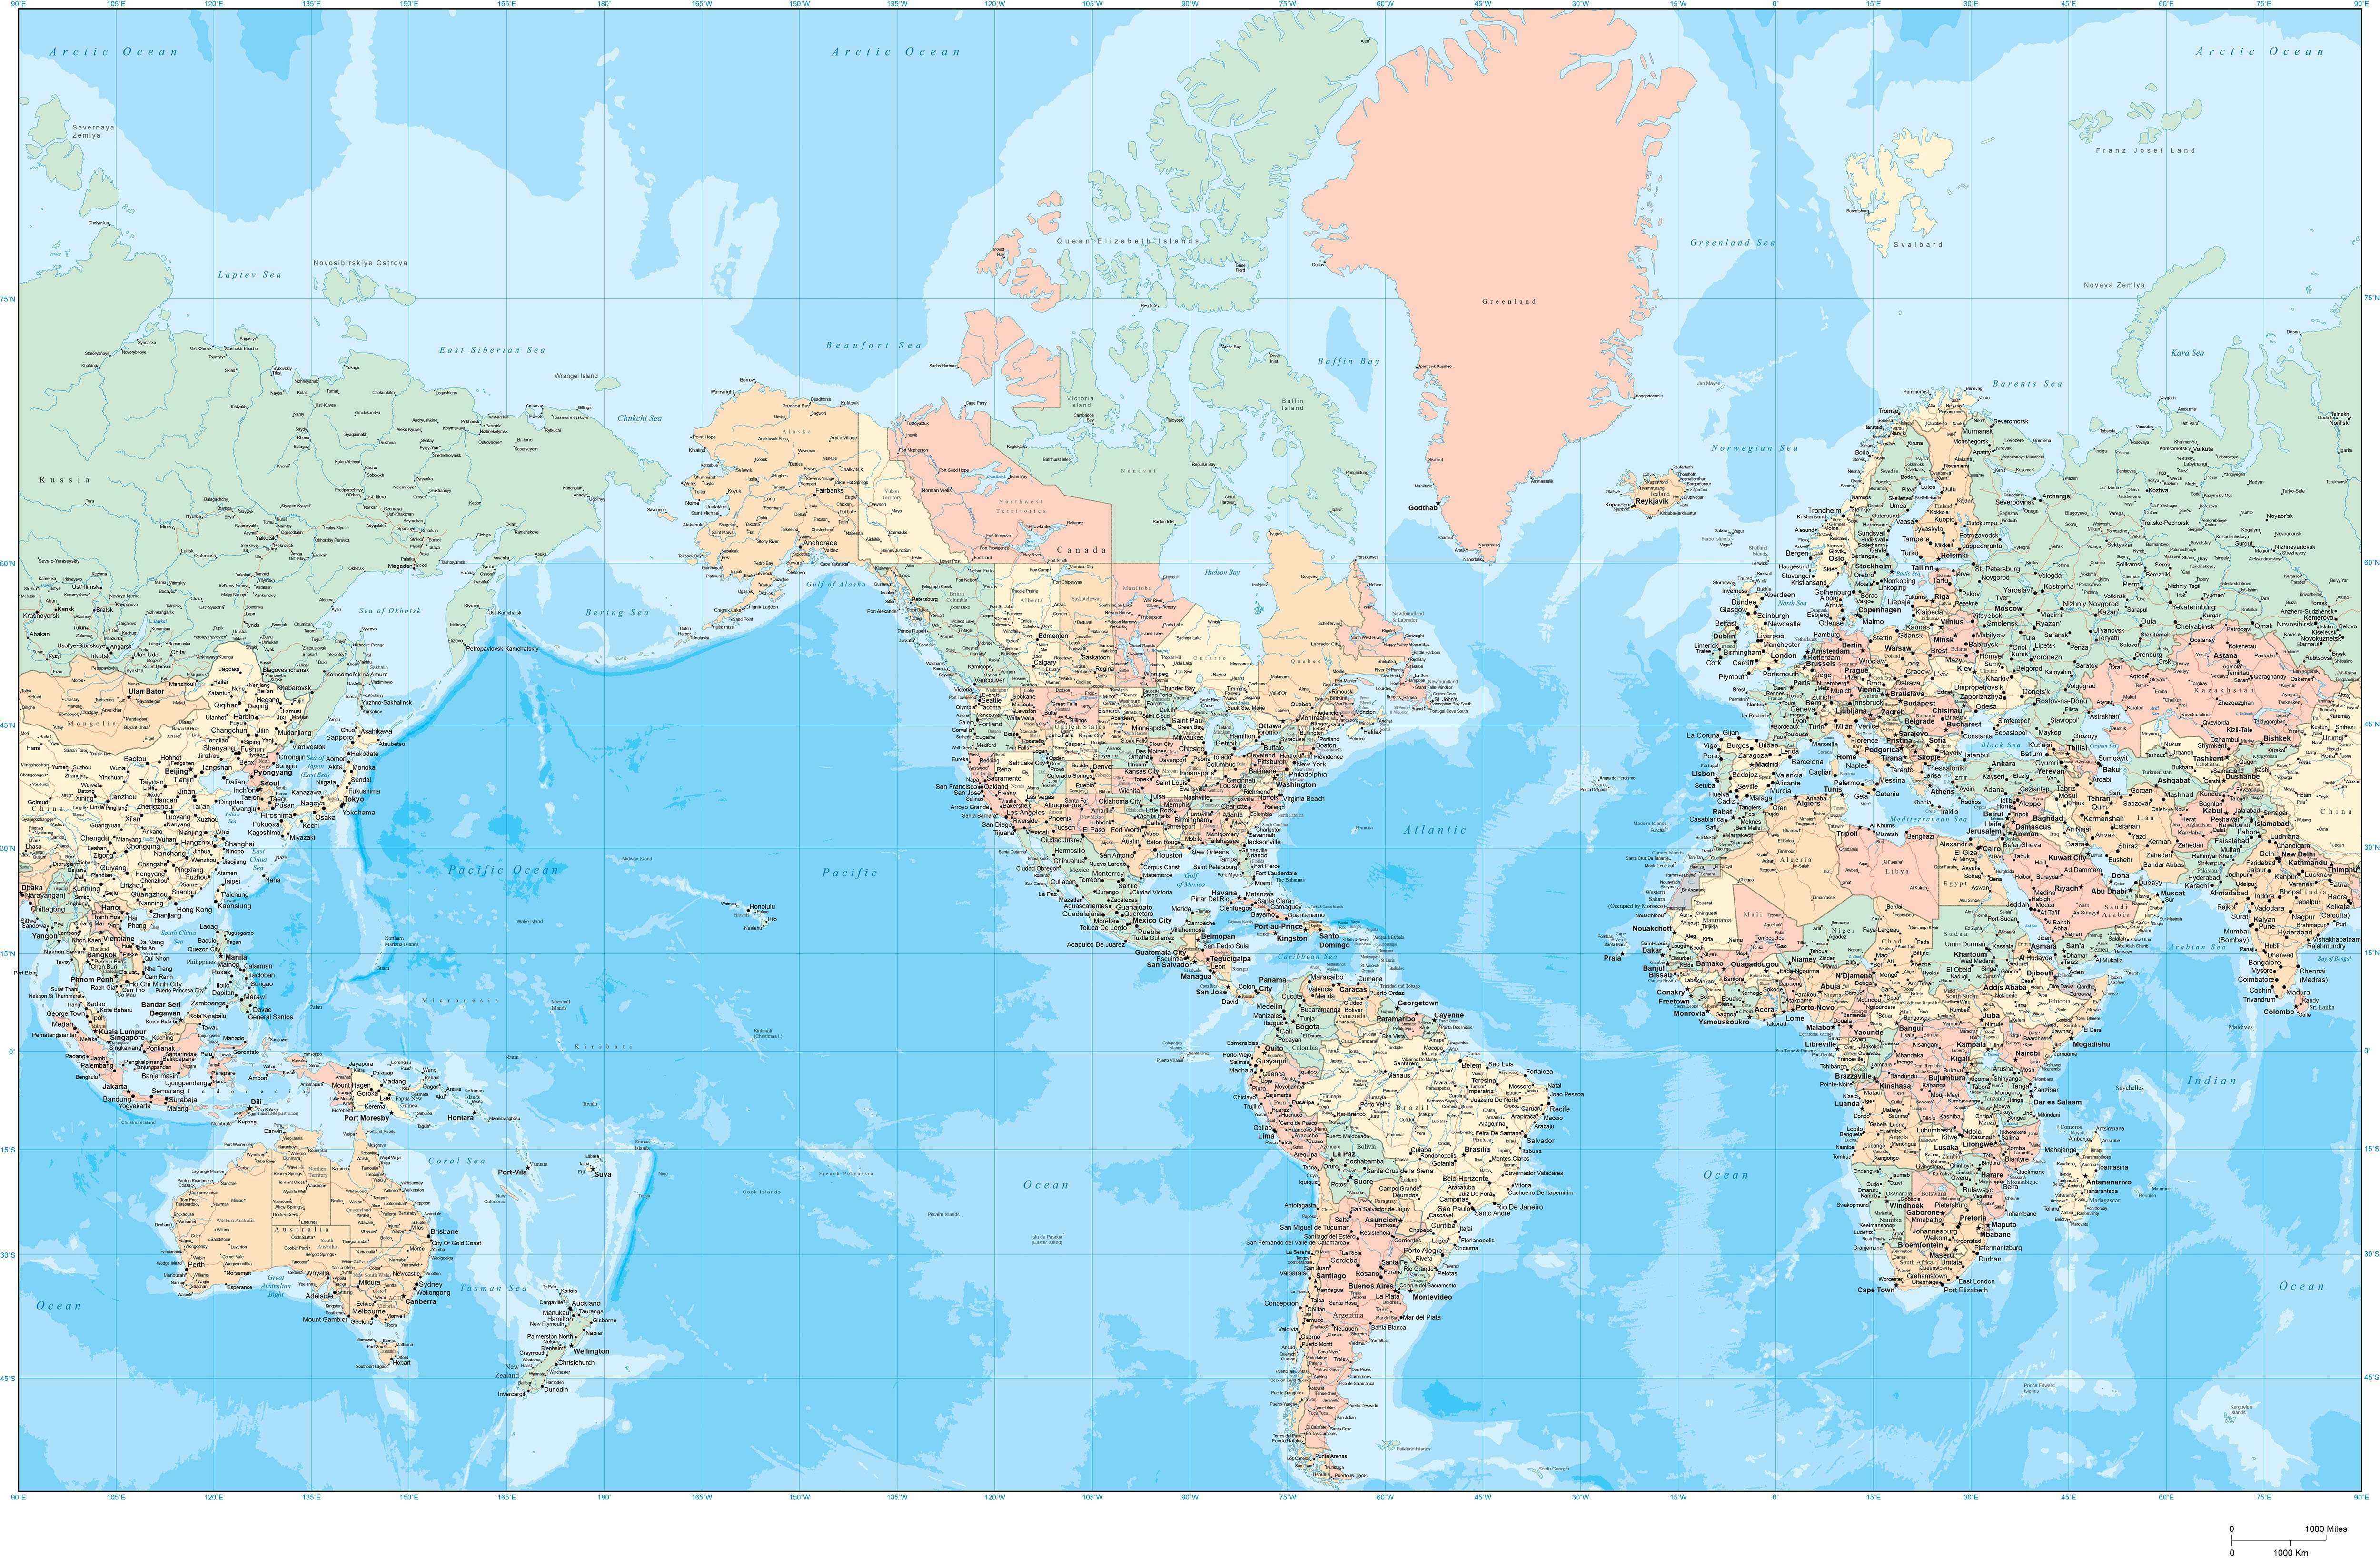 detailed world map